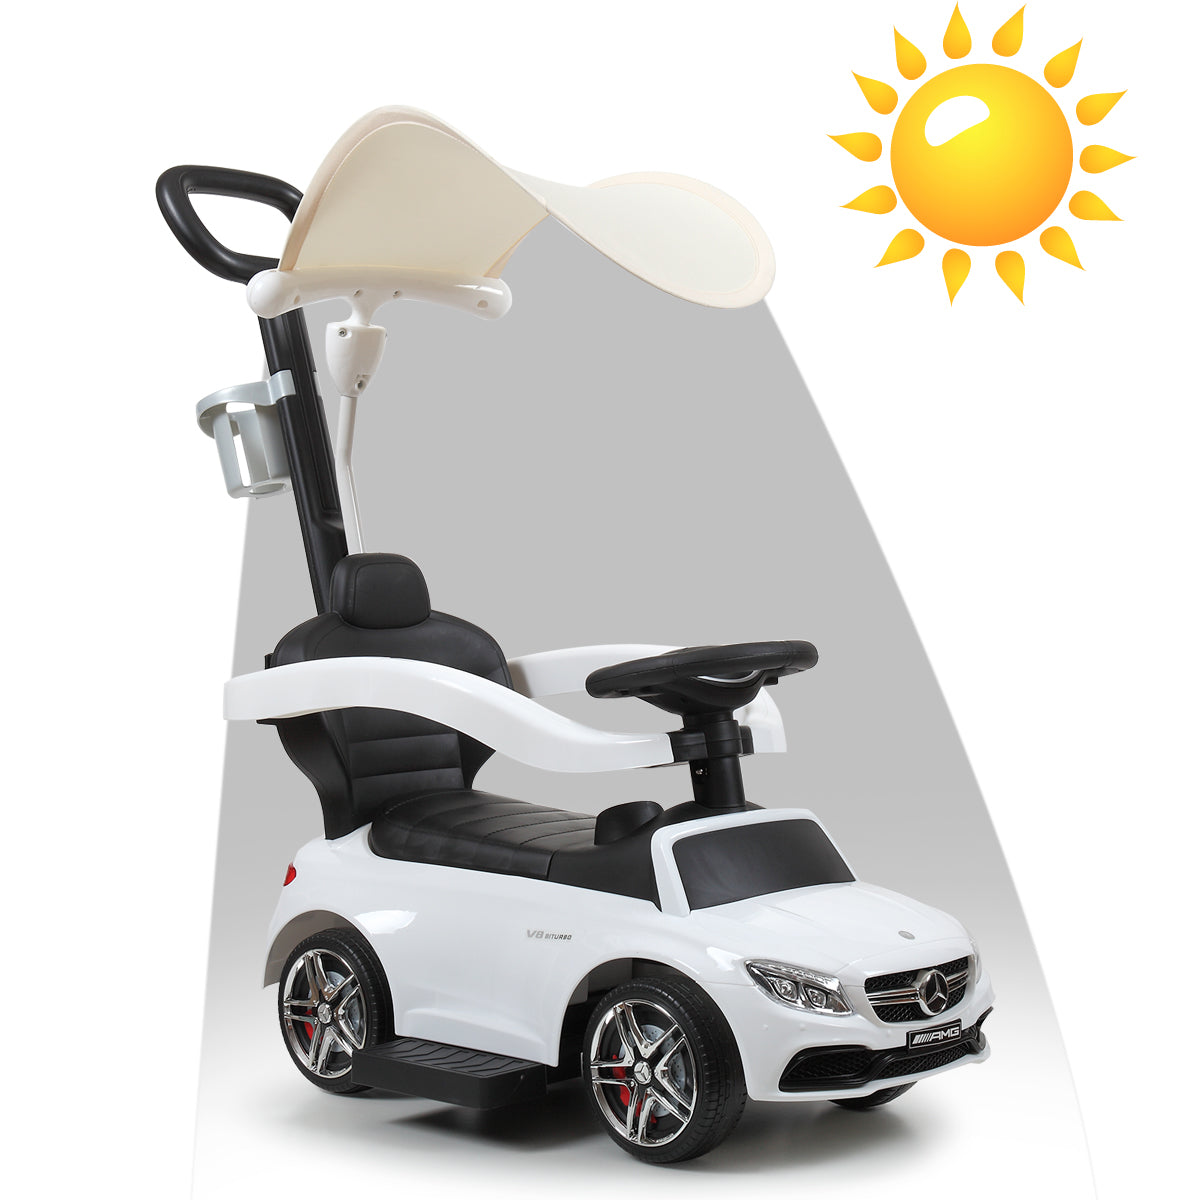 Push Car for Toddlers, 3 in 1 Licensed Mercedes Benz Car Stroller with Canopy, Parent Handle, Safety Bar, Cup Holder, Music, Horn and Storage, Baby Ride on Car for 1-3 Years Boys & Girls, White, C16